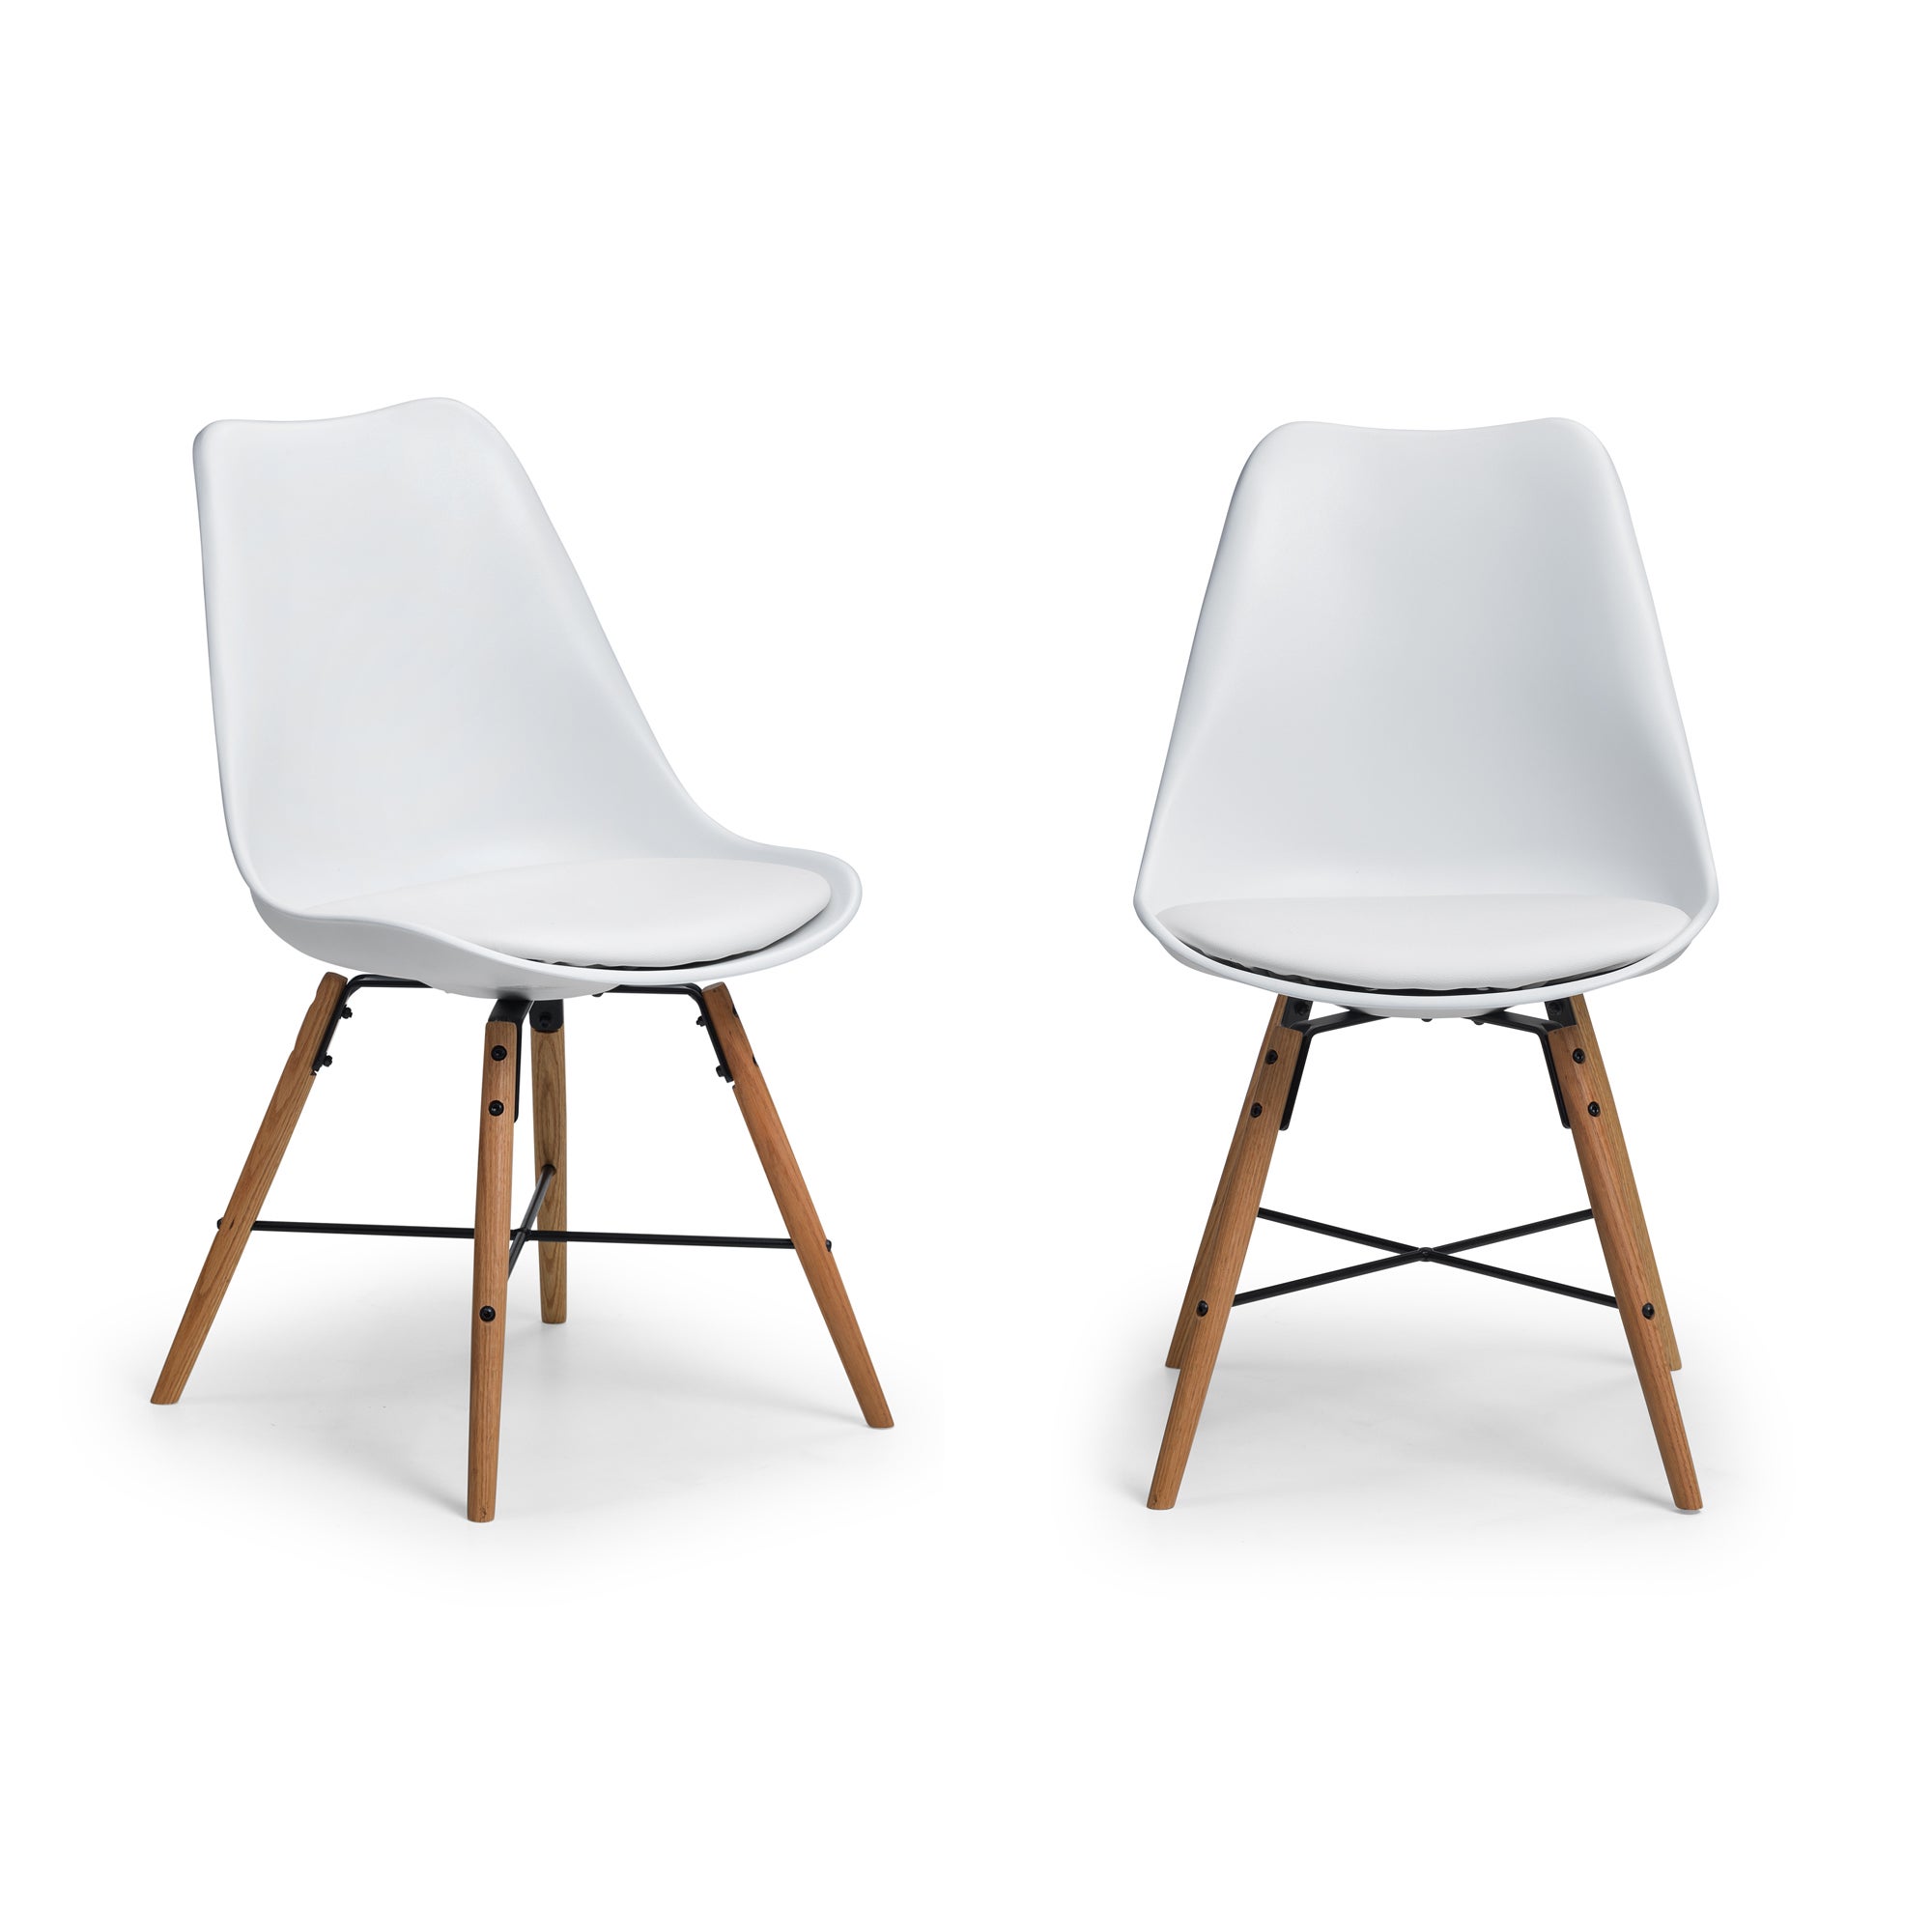 Kari Set Of 2 Dining Chairs Faux Leather White